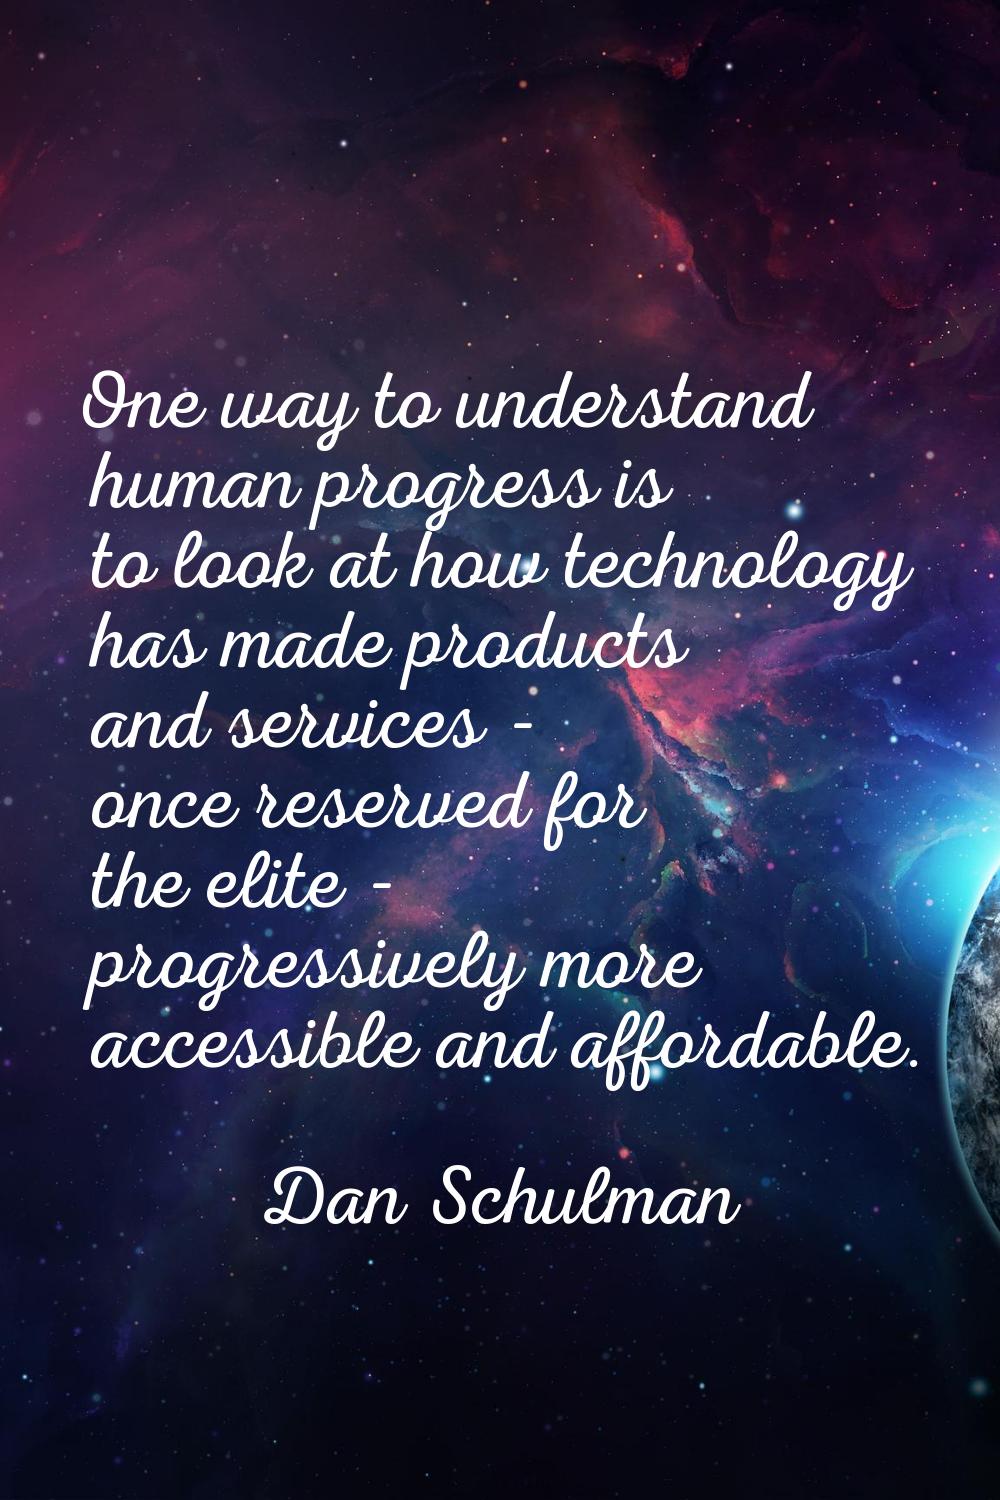 One way to understand human progress is to look at how technology has made products and services - 